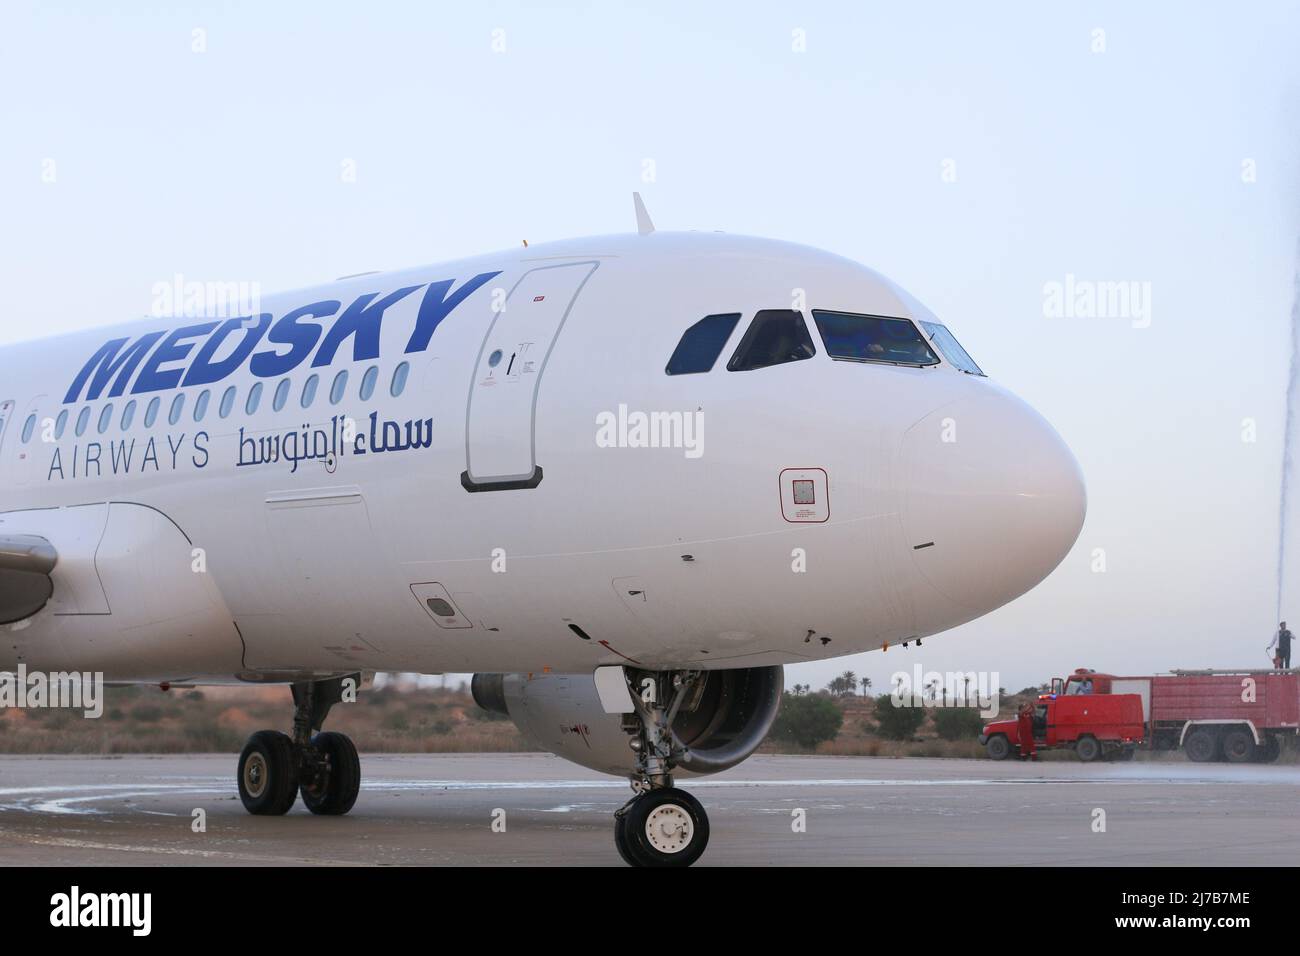 A view of a private Libyan airline Medsky at Misrata International Airport, Flights between the Europe union countries had been suspended for eight years due to the conflict in Libya Stock Photo